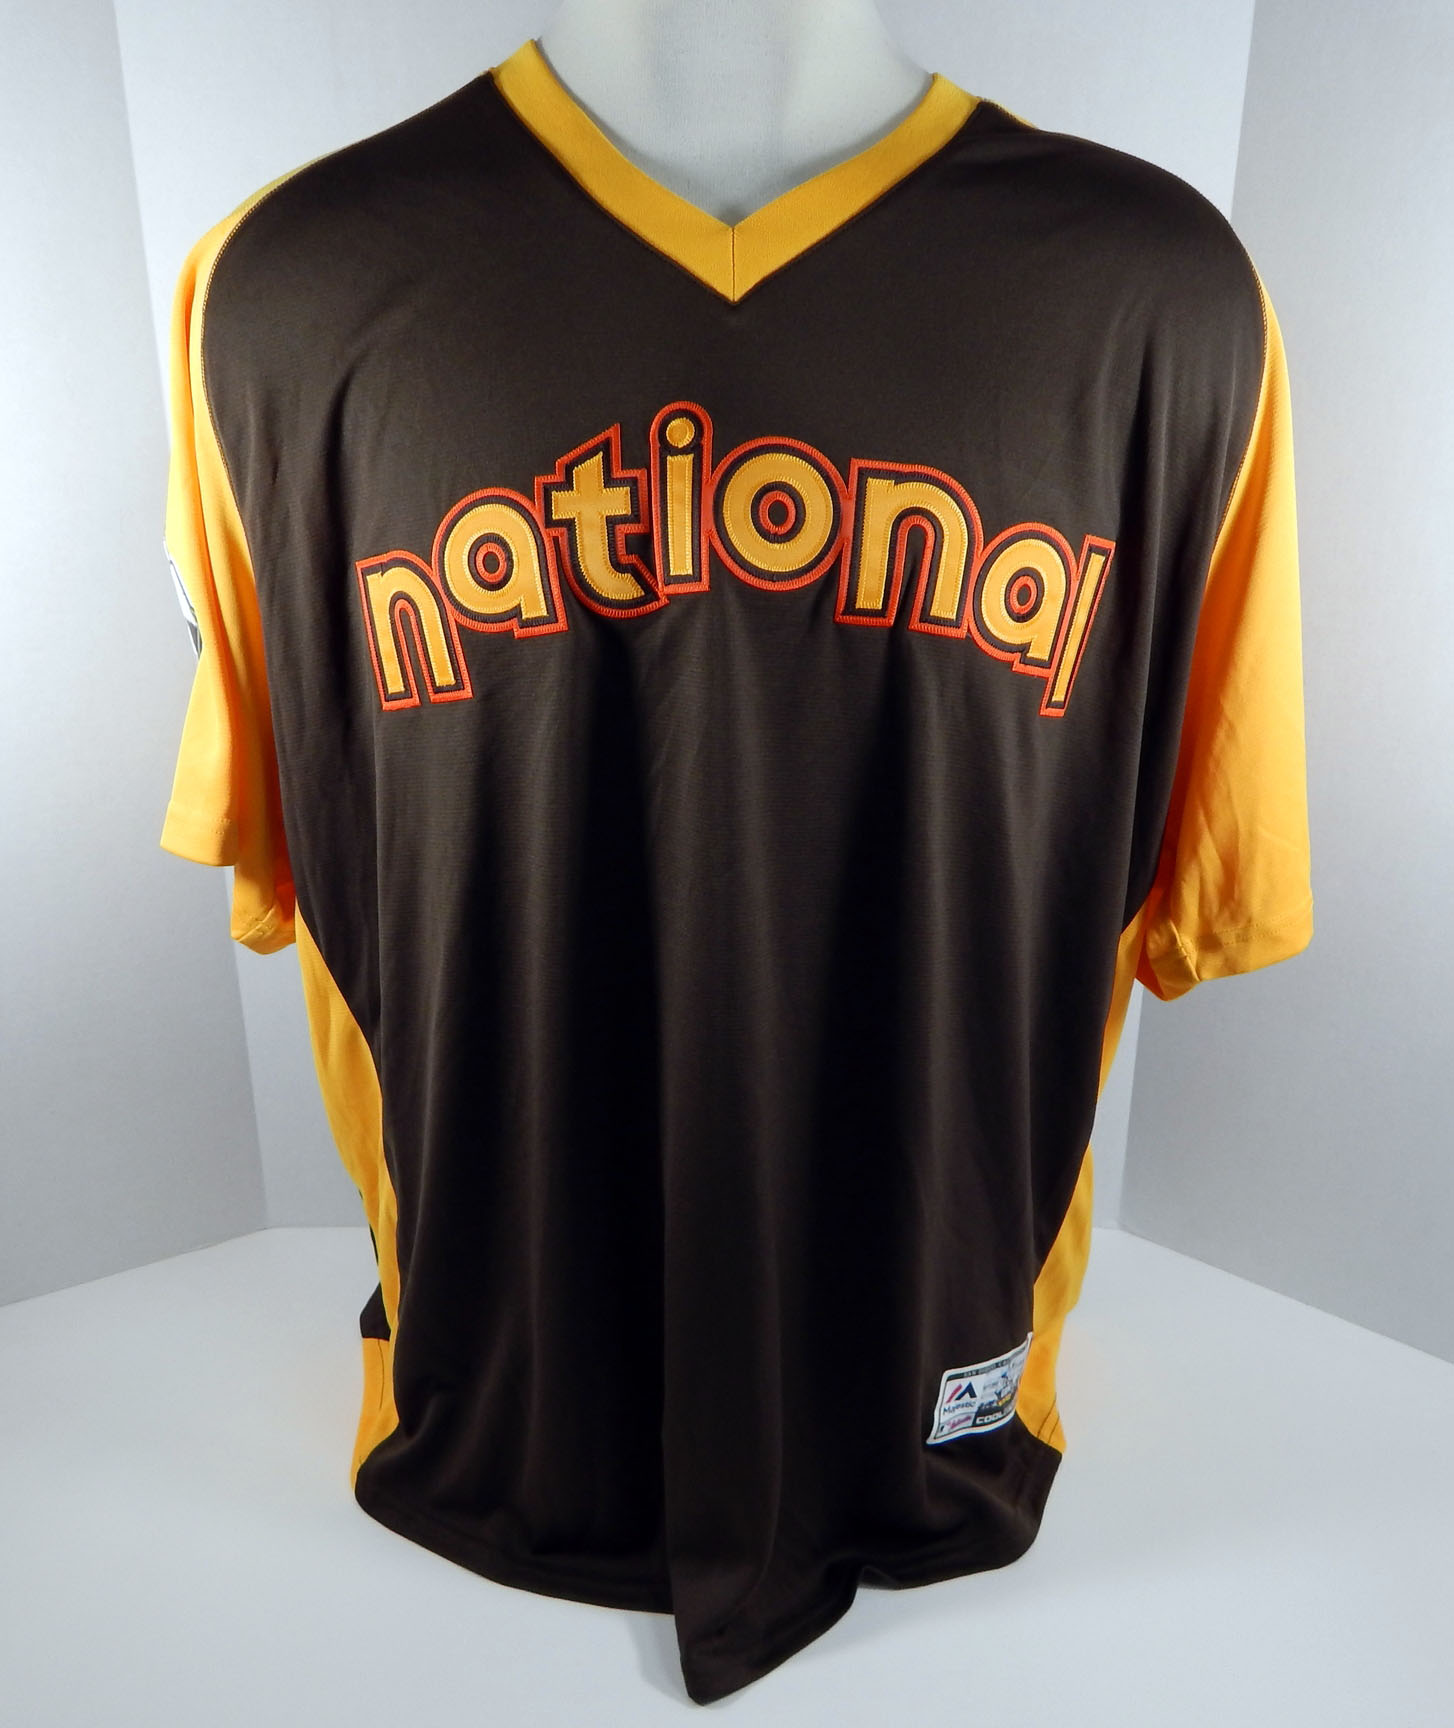 padres all star jersey 2016